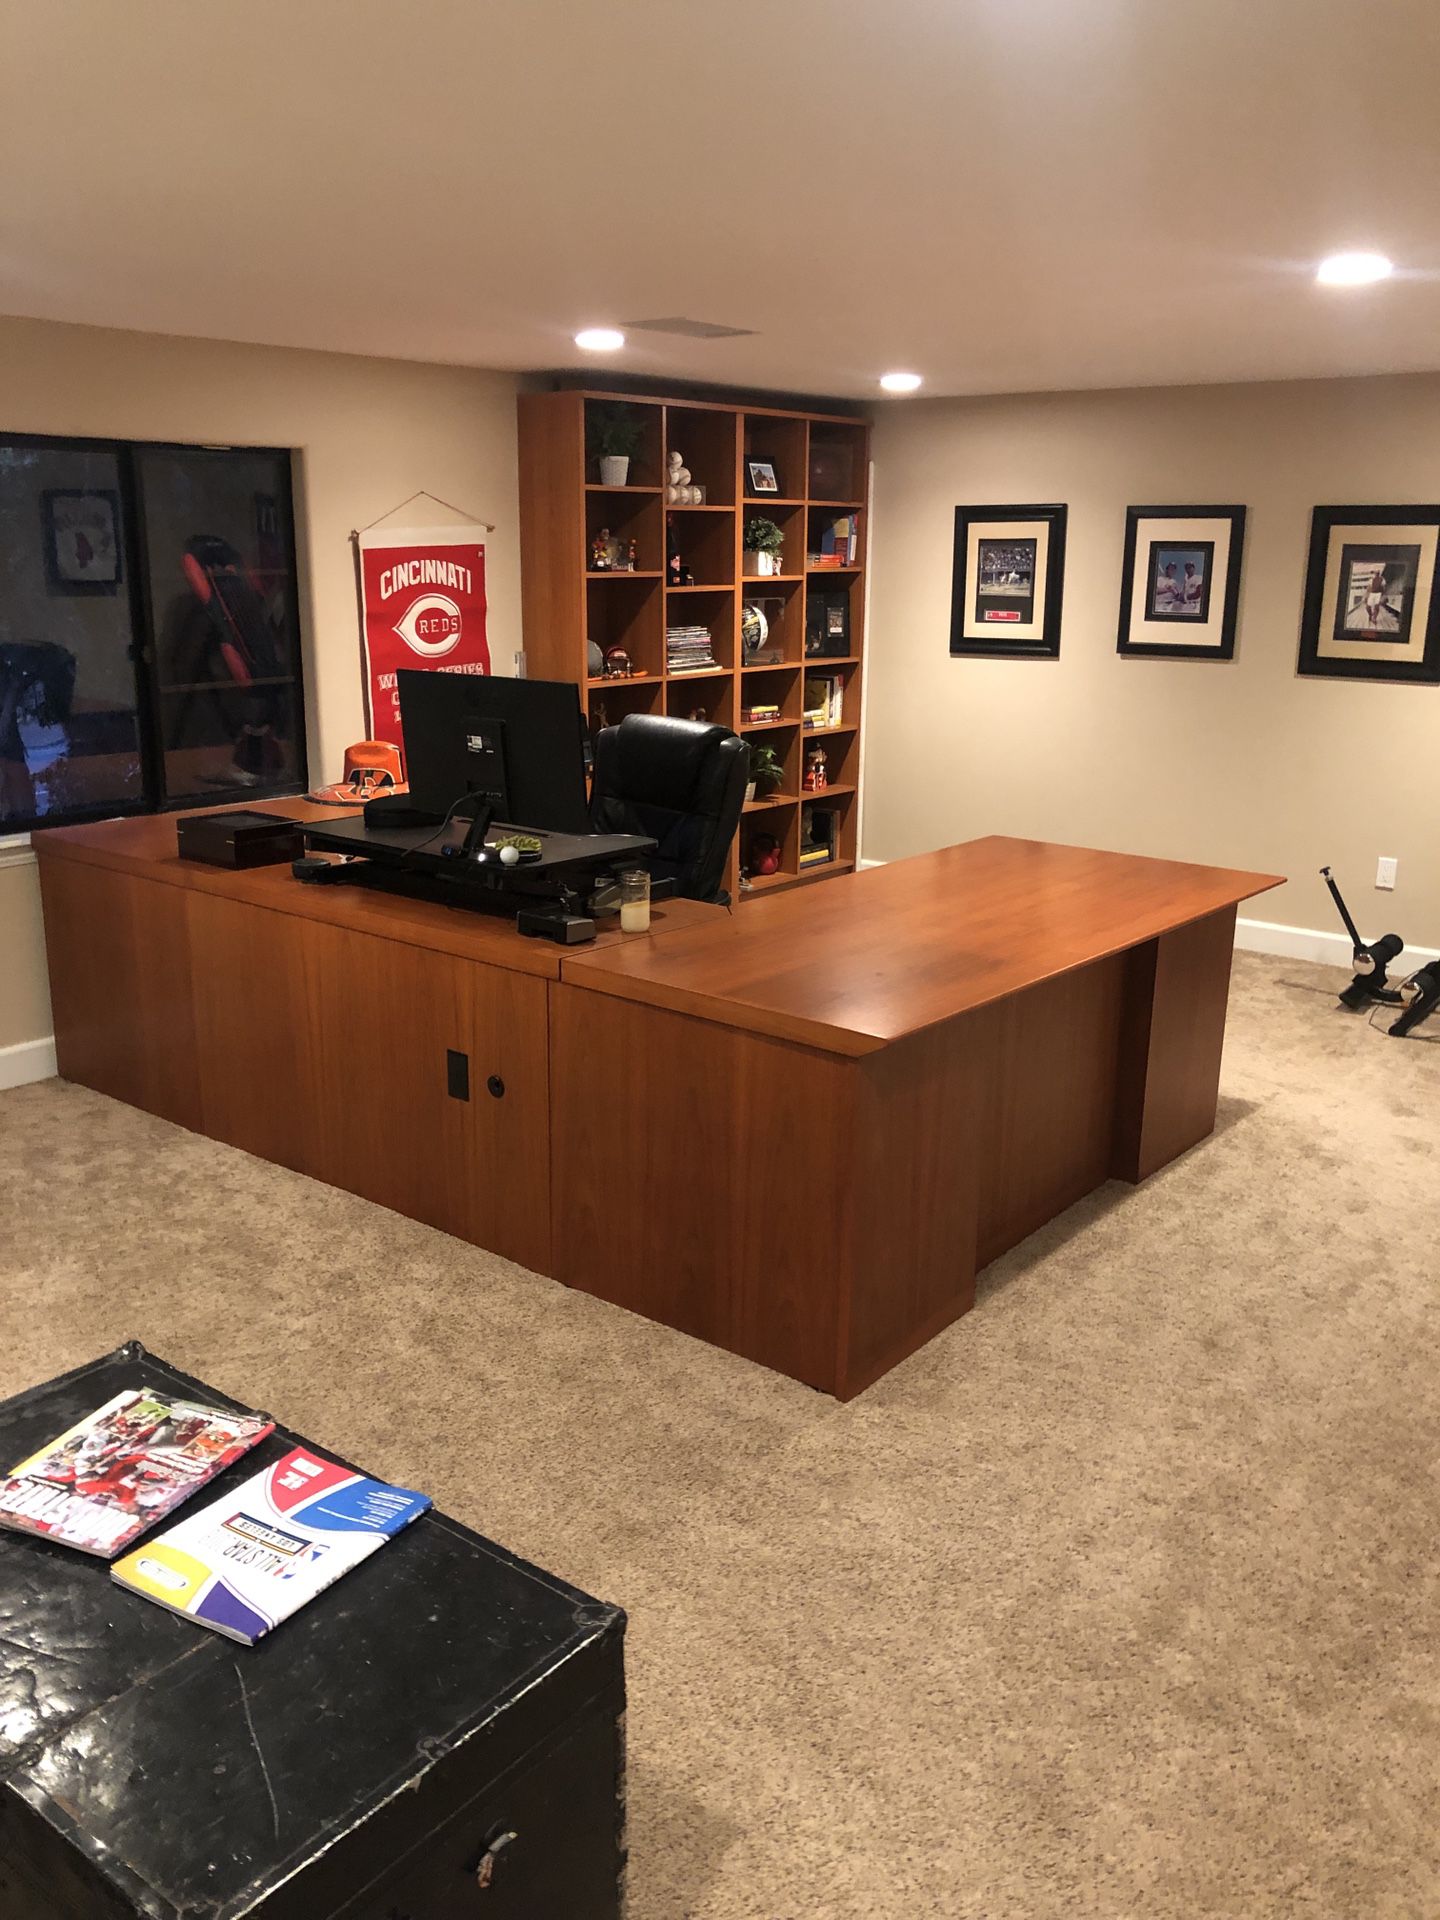 Solid wood executive desk and shelves